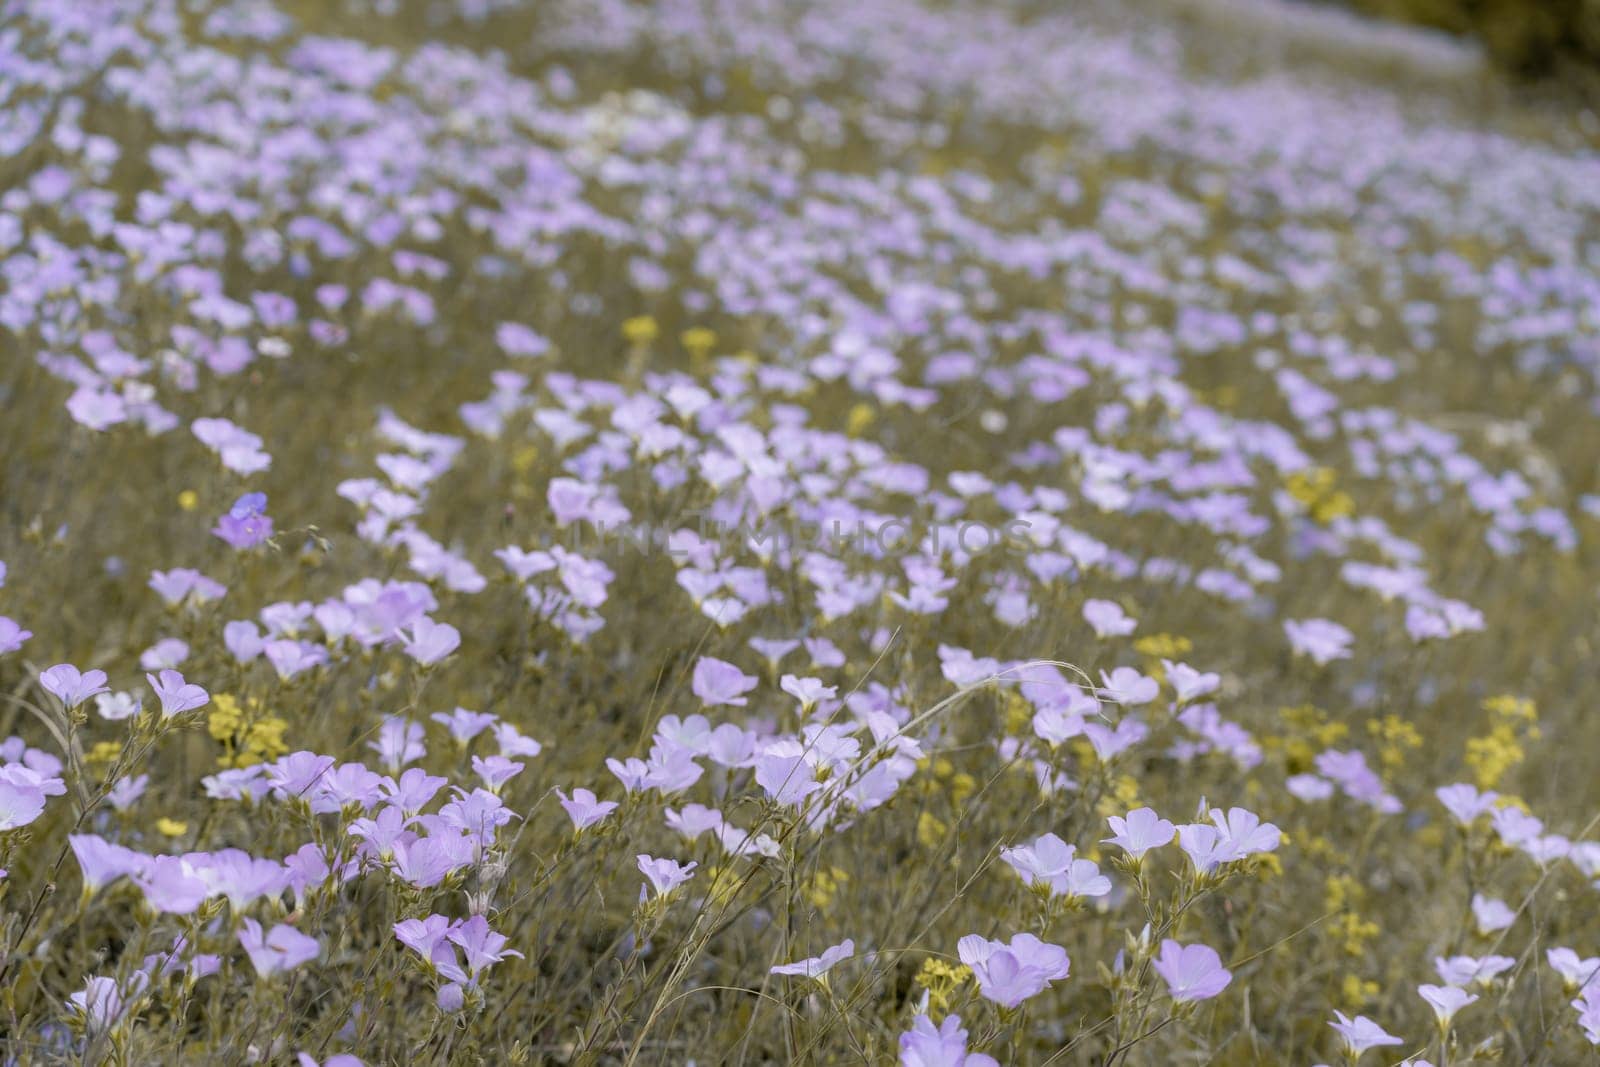 linen field linum usitatissimum. Flax flowers swaying in the wind. Slow motion video.